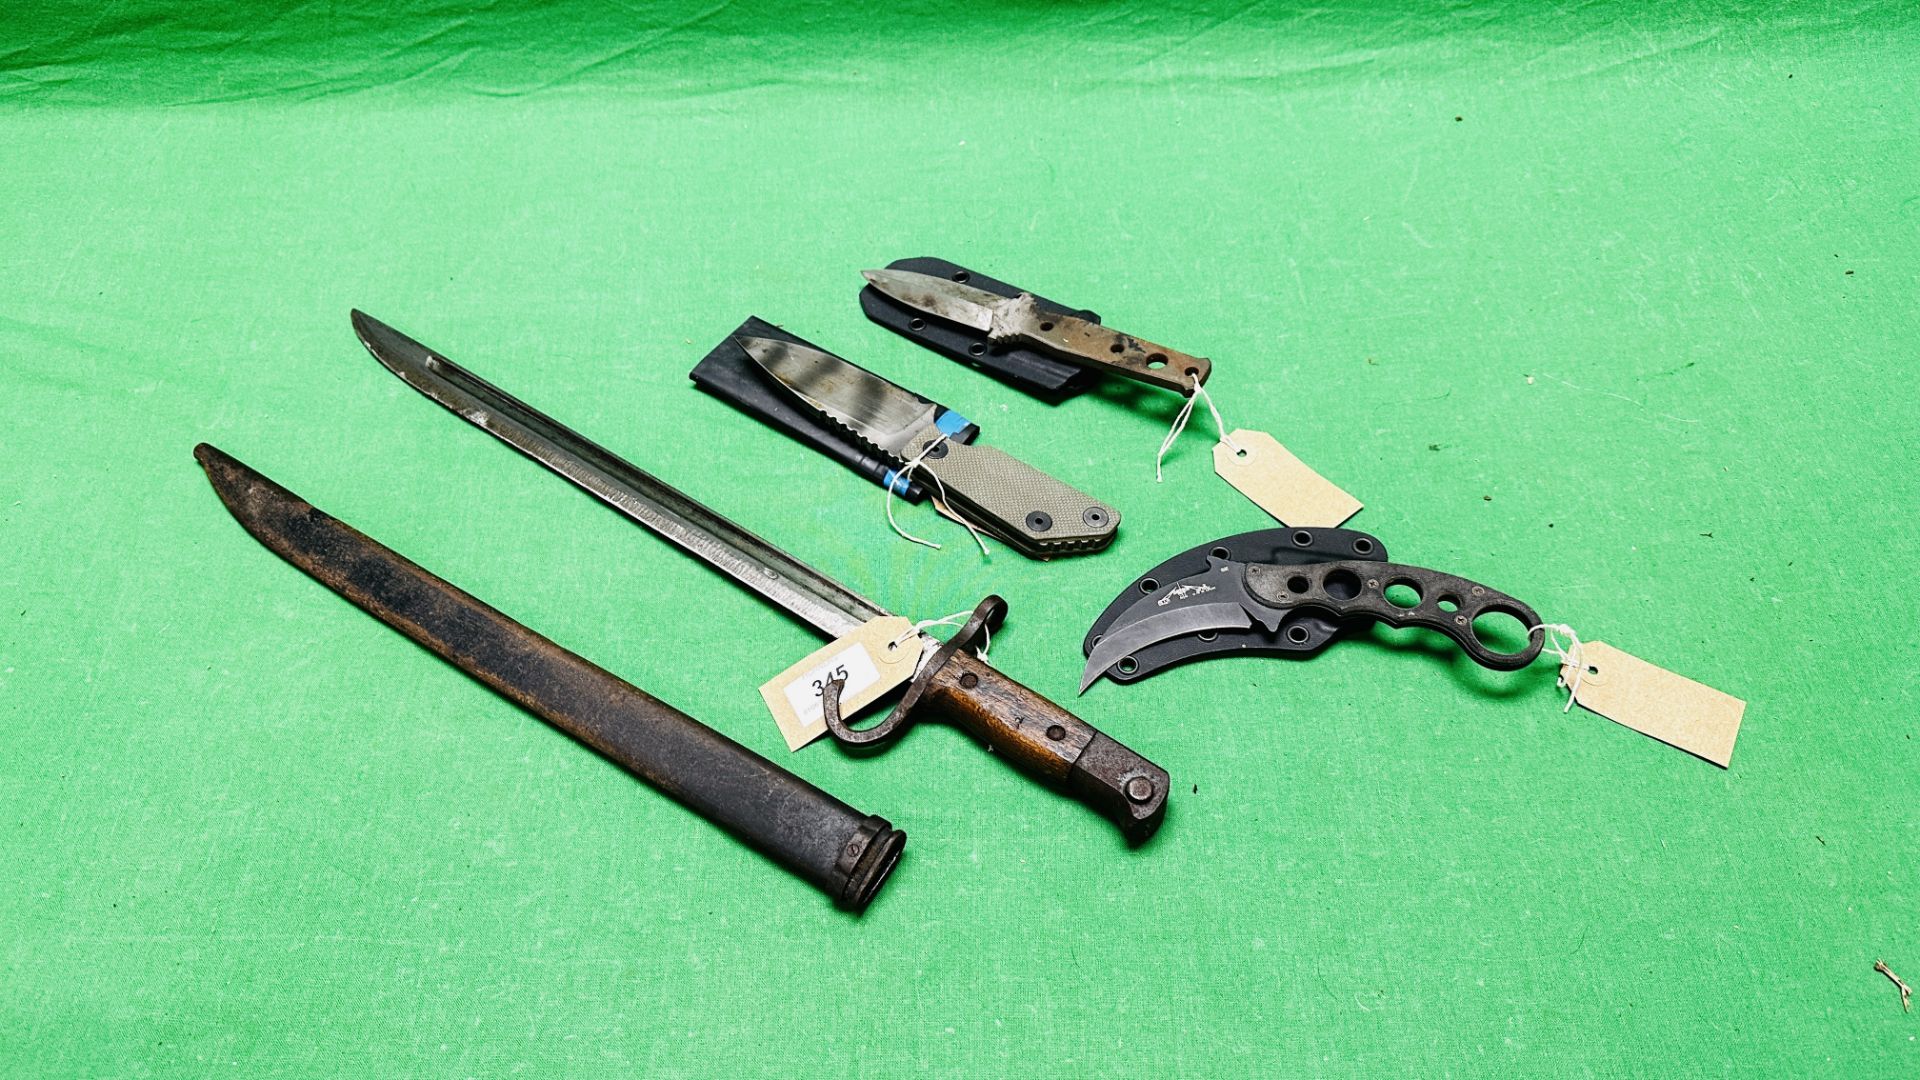 AN ANTIQUE FRENCH BAYONET WITH SCABBARD ALONG WITH THREE VARIOUS KNIVES INCLUDING EMERSON, STRIDER,